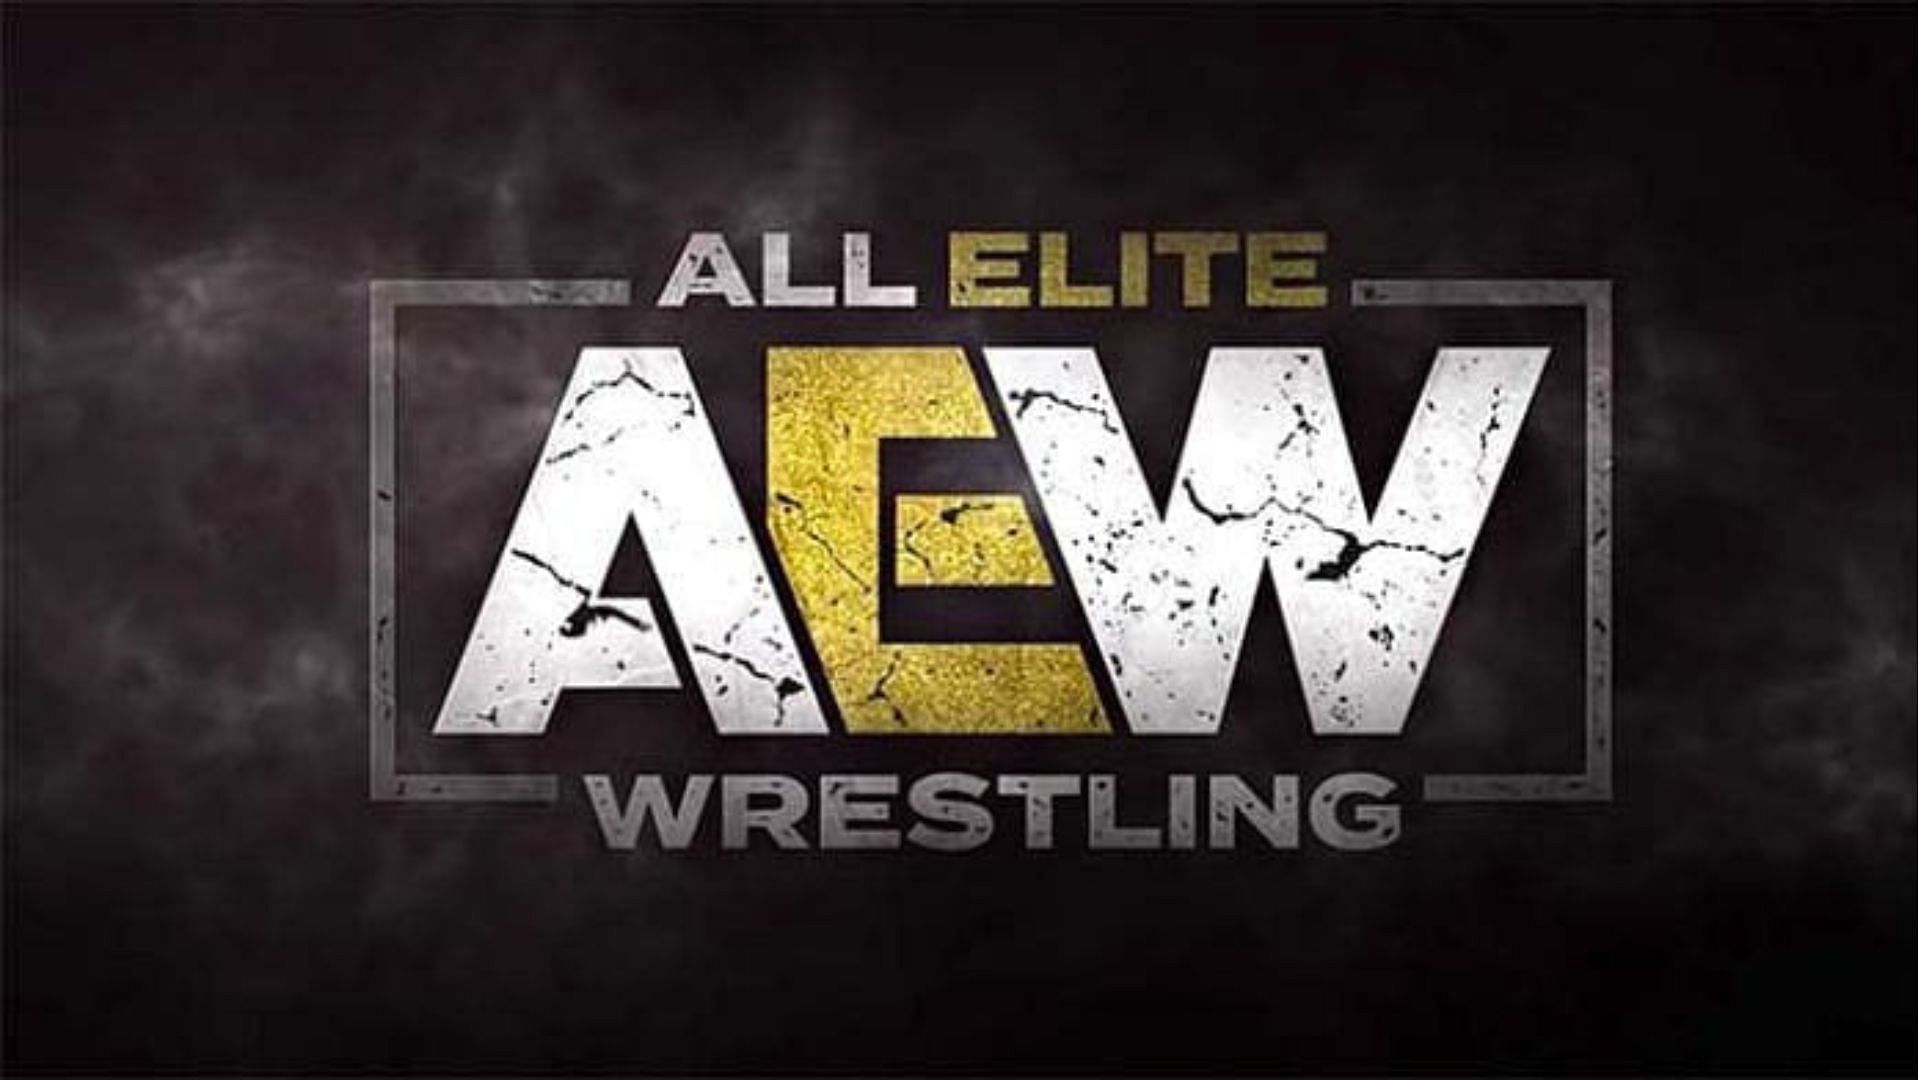 Injured AEW star returning soon to the promotion